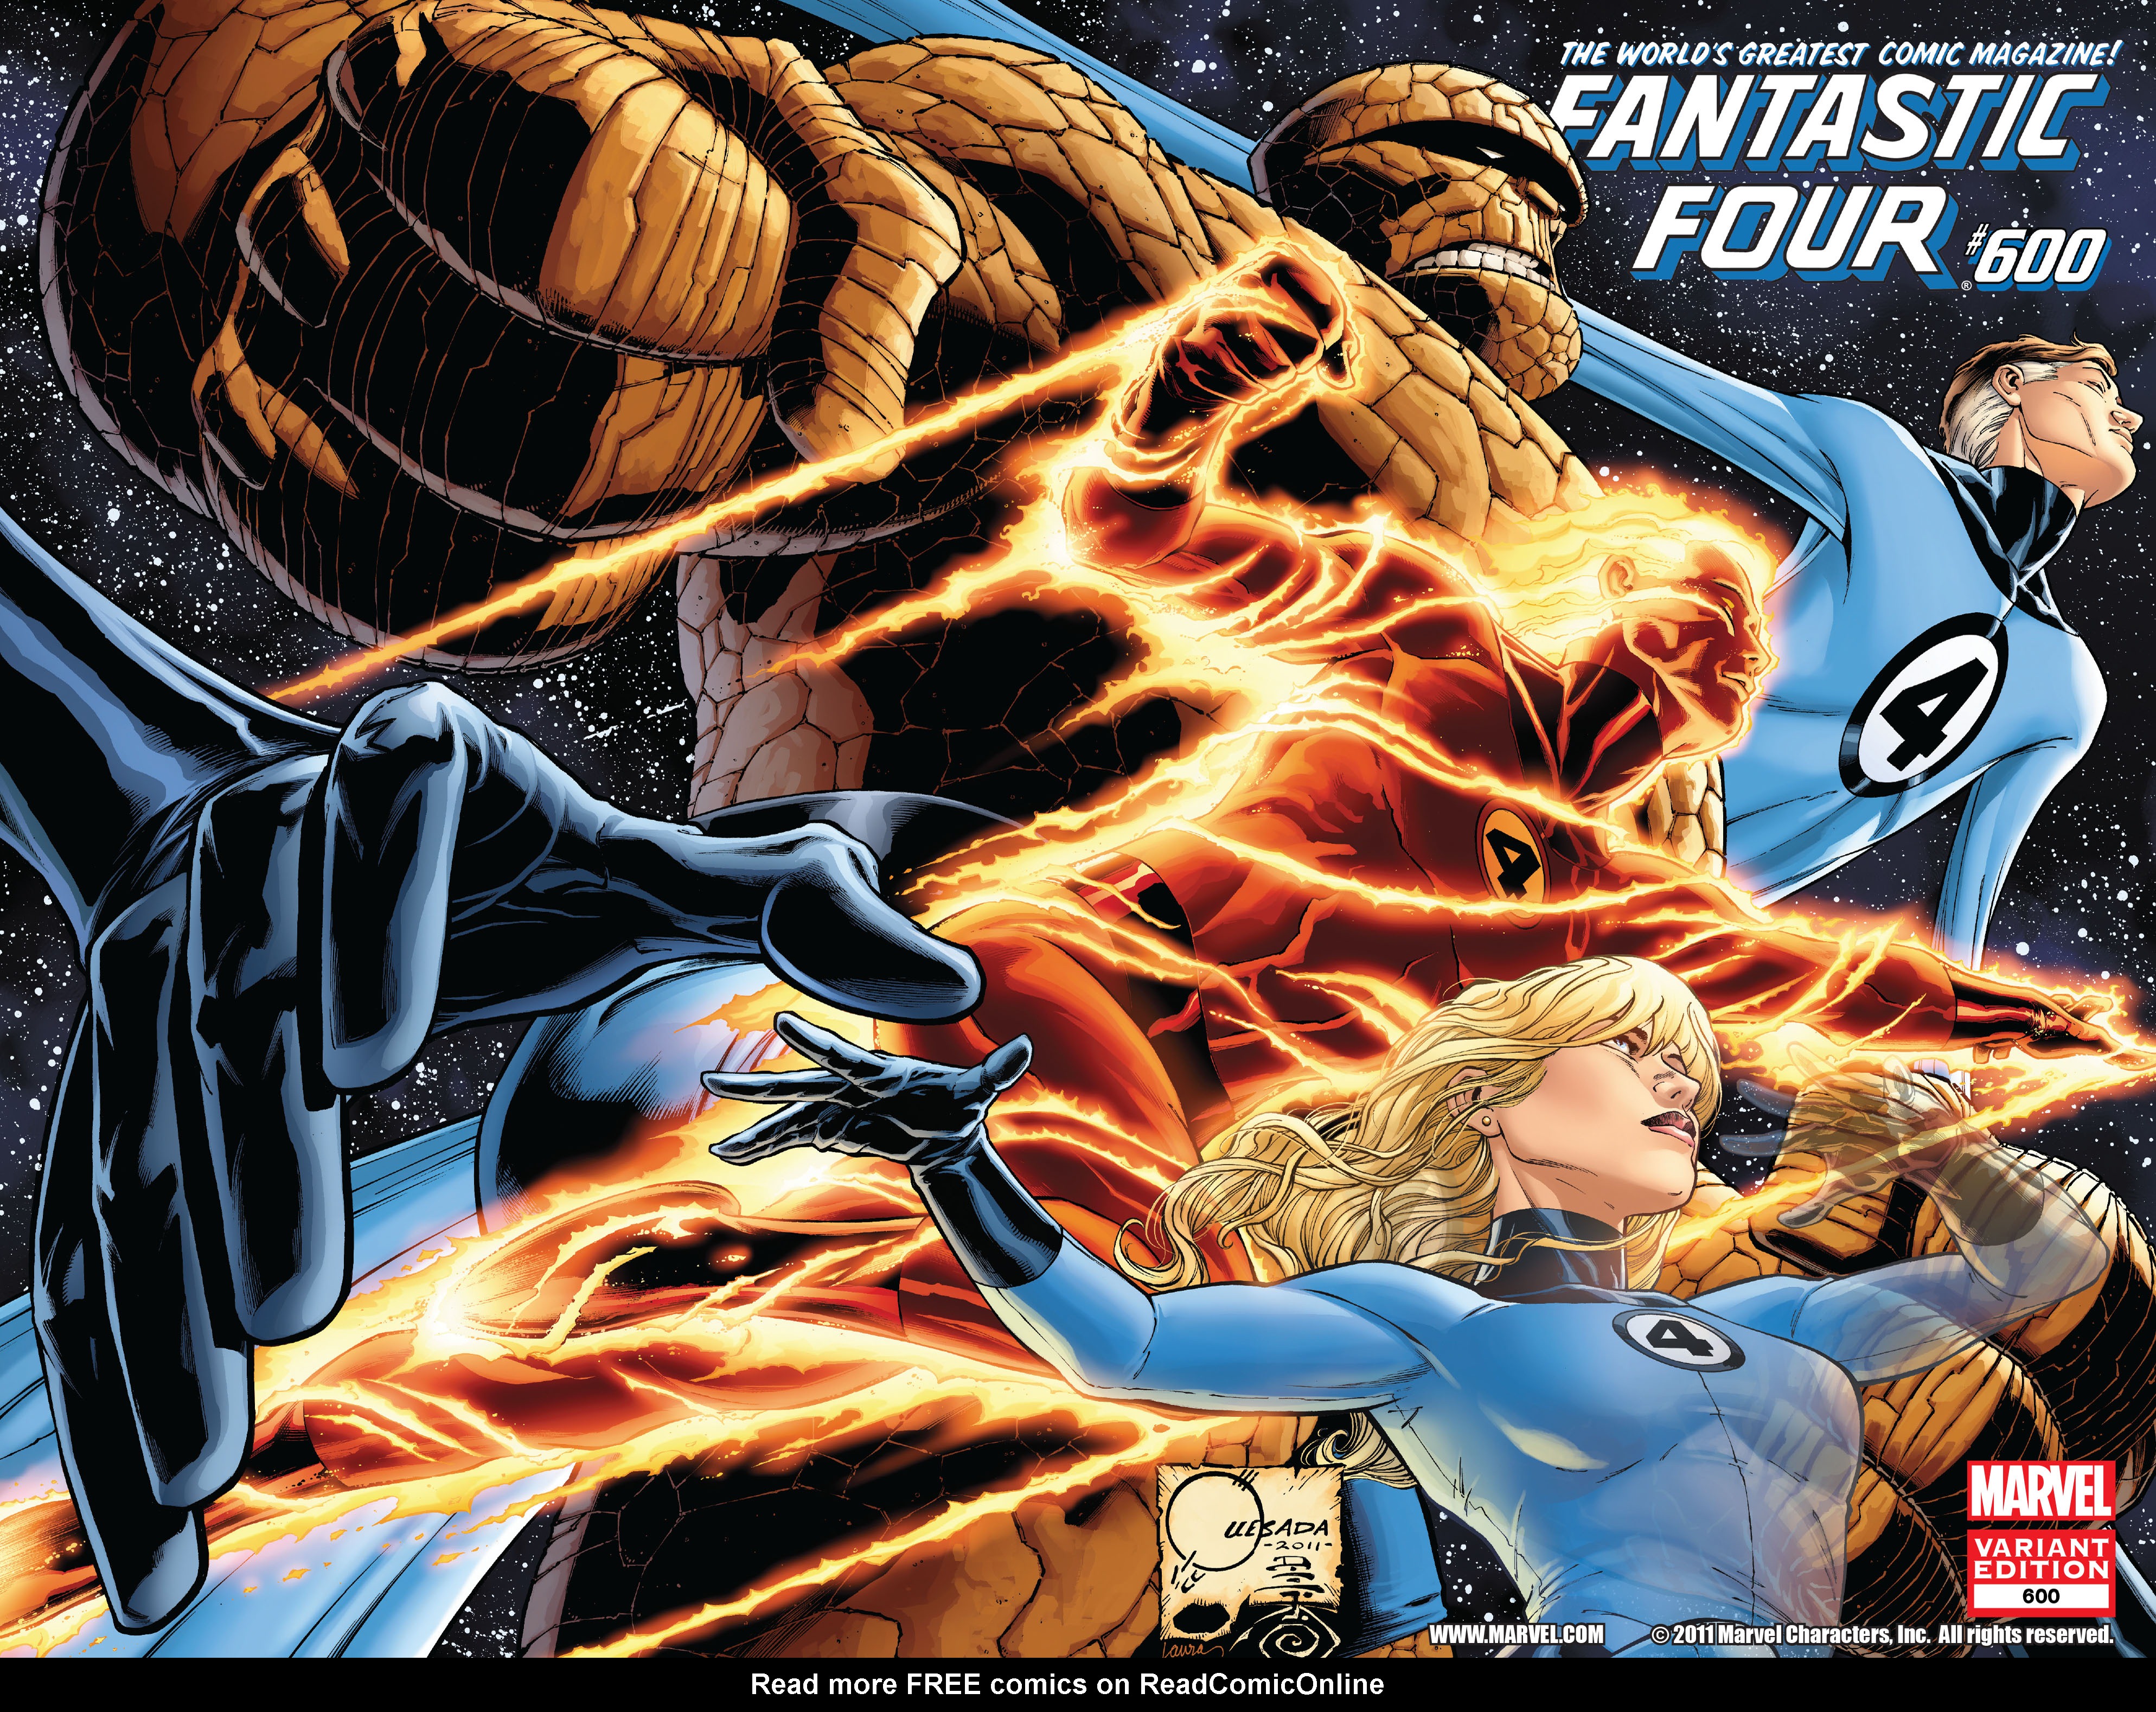 Read online Fantastic Four (1961) comic -  Issue #600 - 2